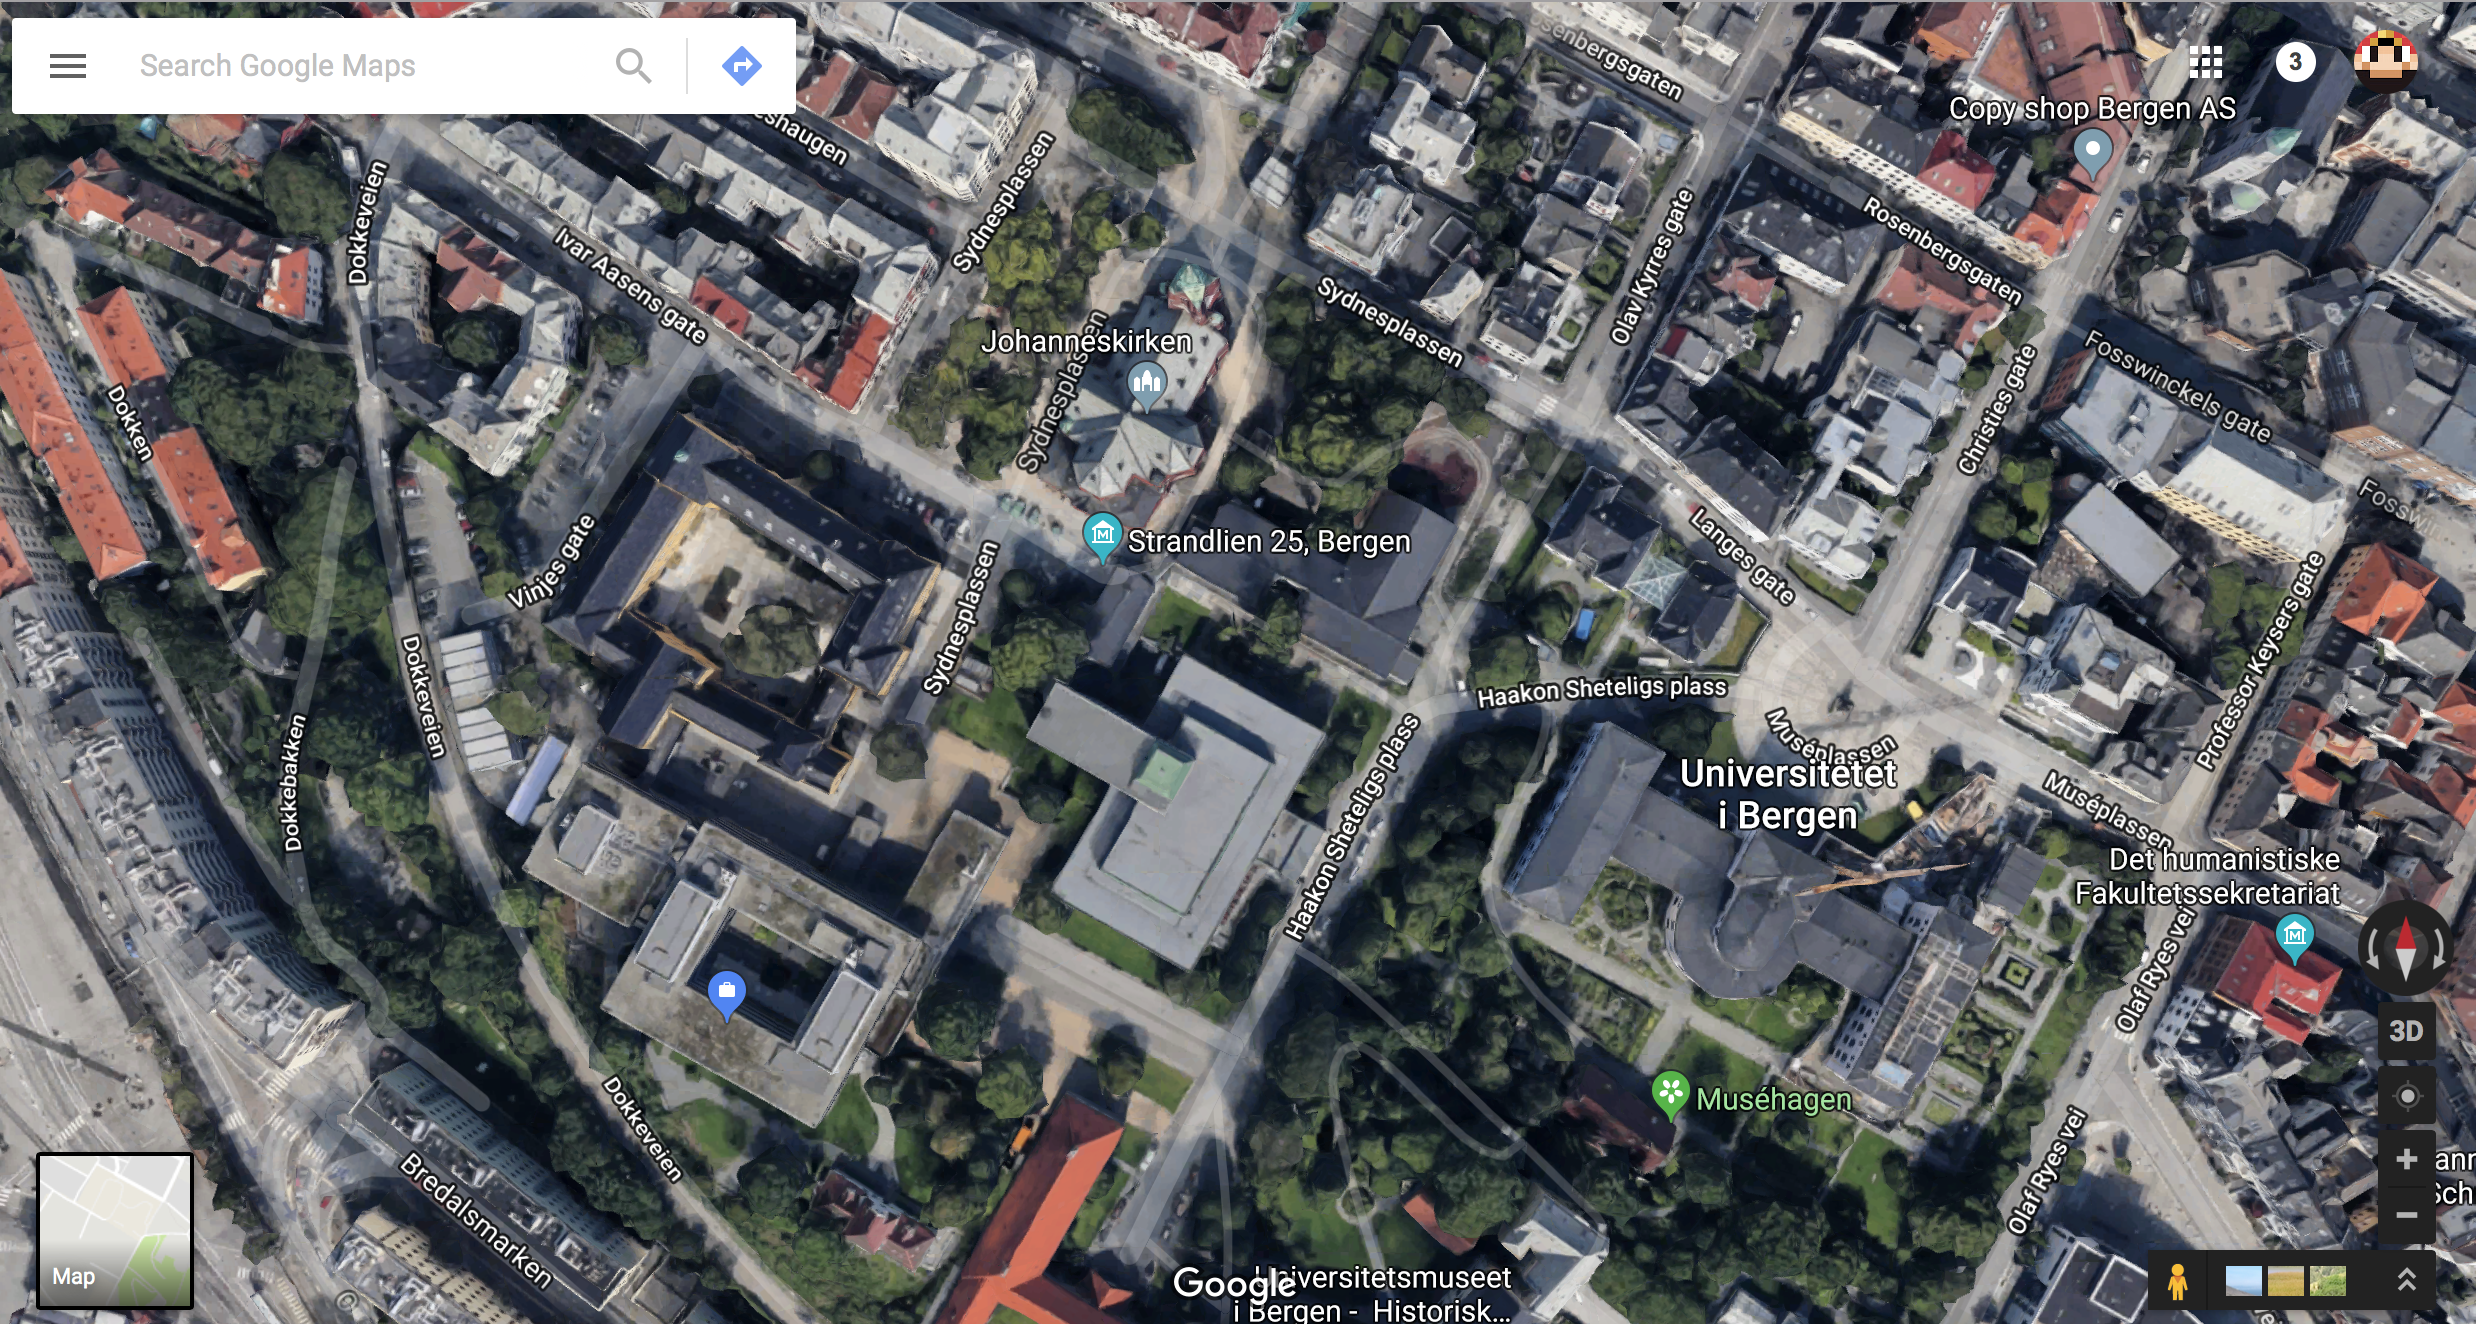 Section of a satellite map image of part of the city of Bergen, showing streets, trees, buildings, parked cars. 